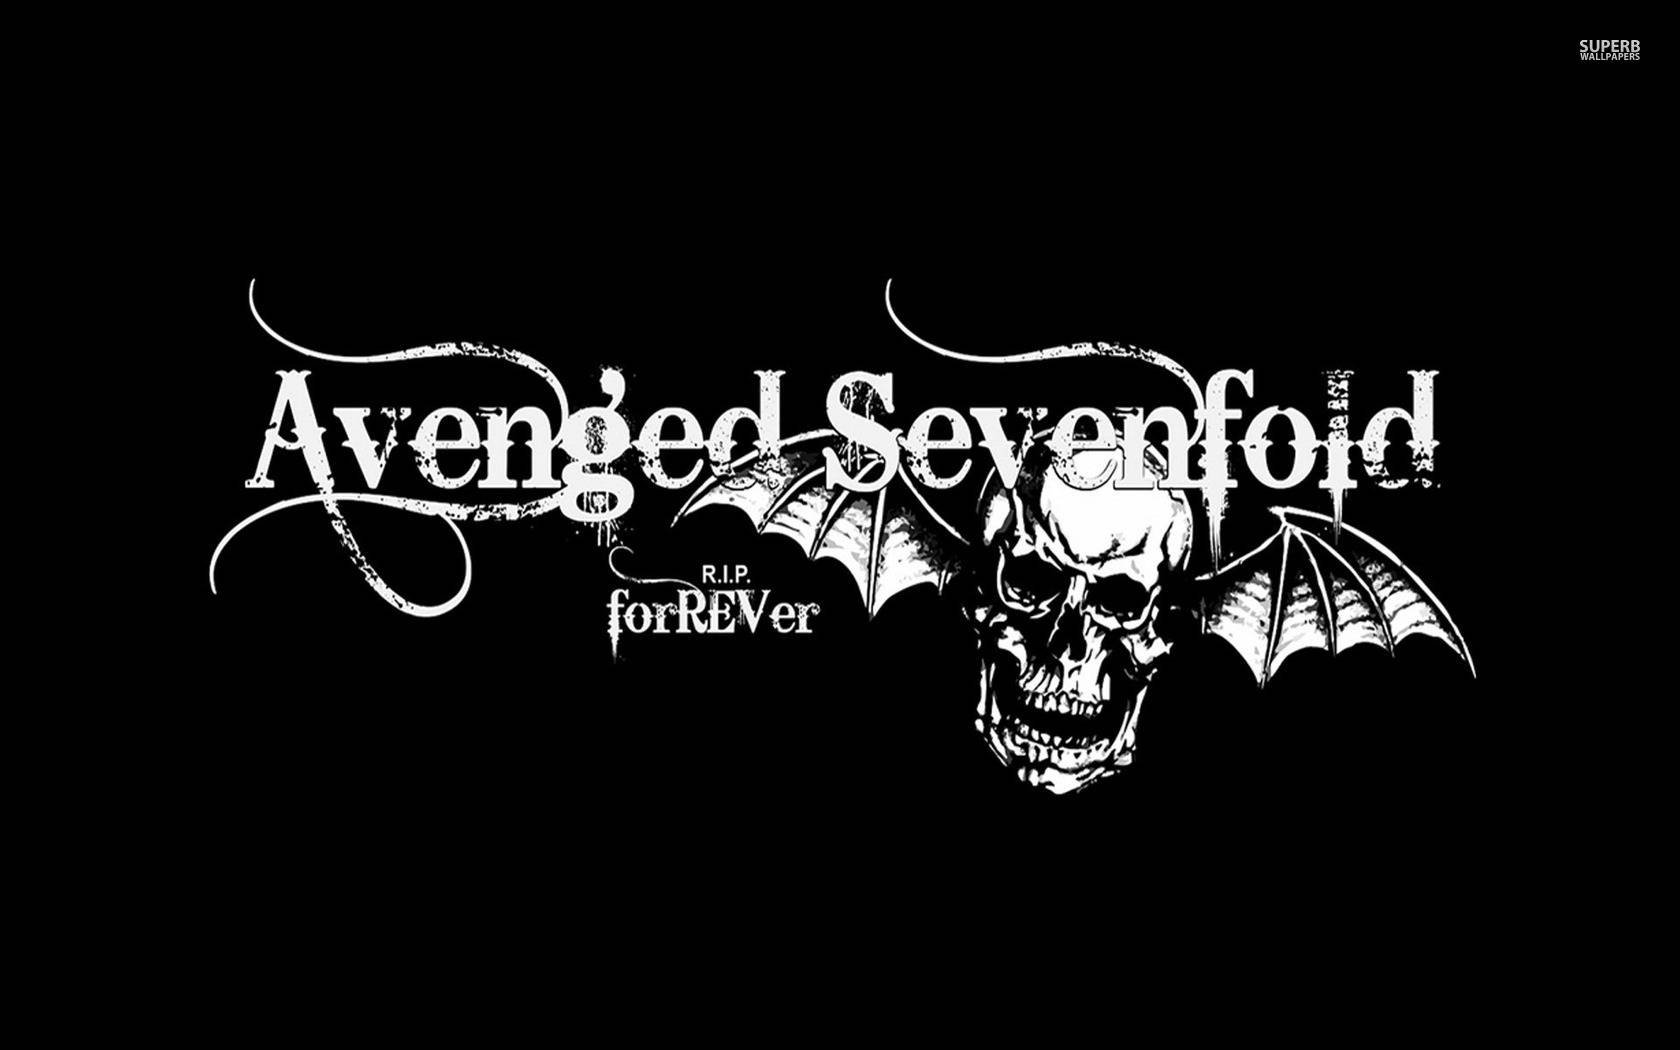 Music Avenged Sevenfold Band Music United States HD Wallpaper Print  Poster on 13x19 Inches Paper Print  Art  Paintings posters in India  Buy  art film design movie music nature and